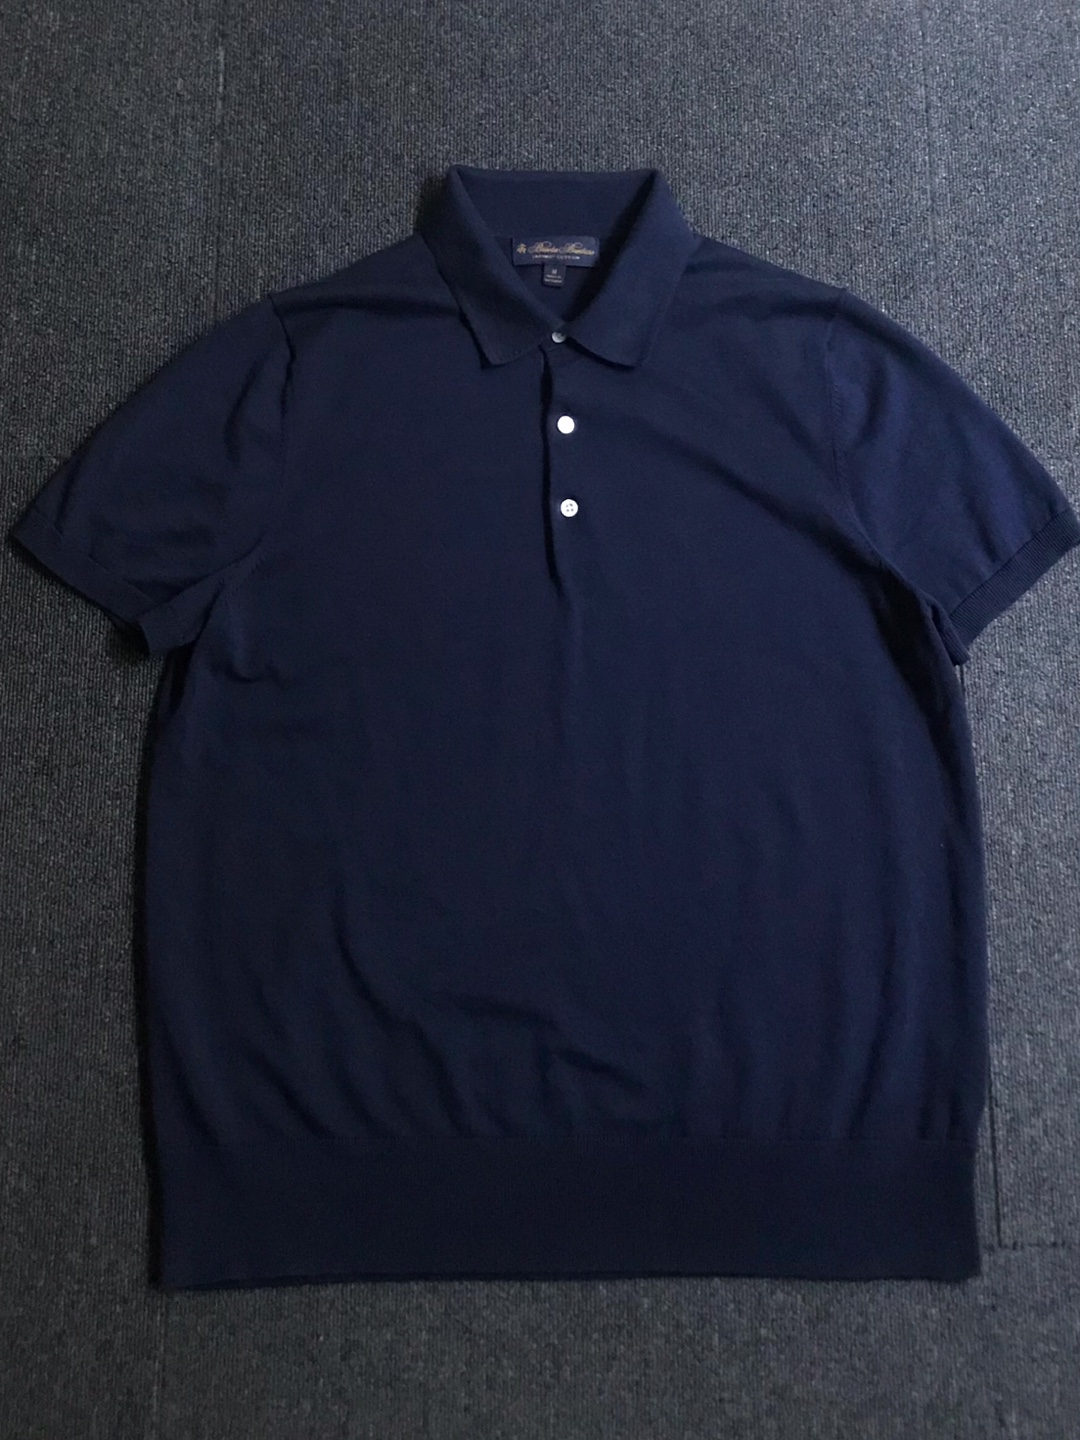 brooks brothers supima cotton knitted polo shirt (M size, ~100 추천)